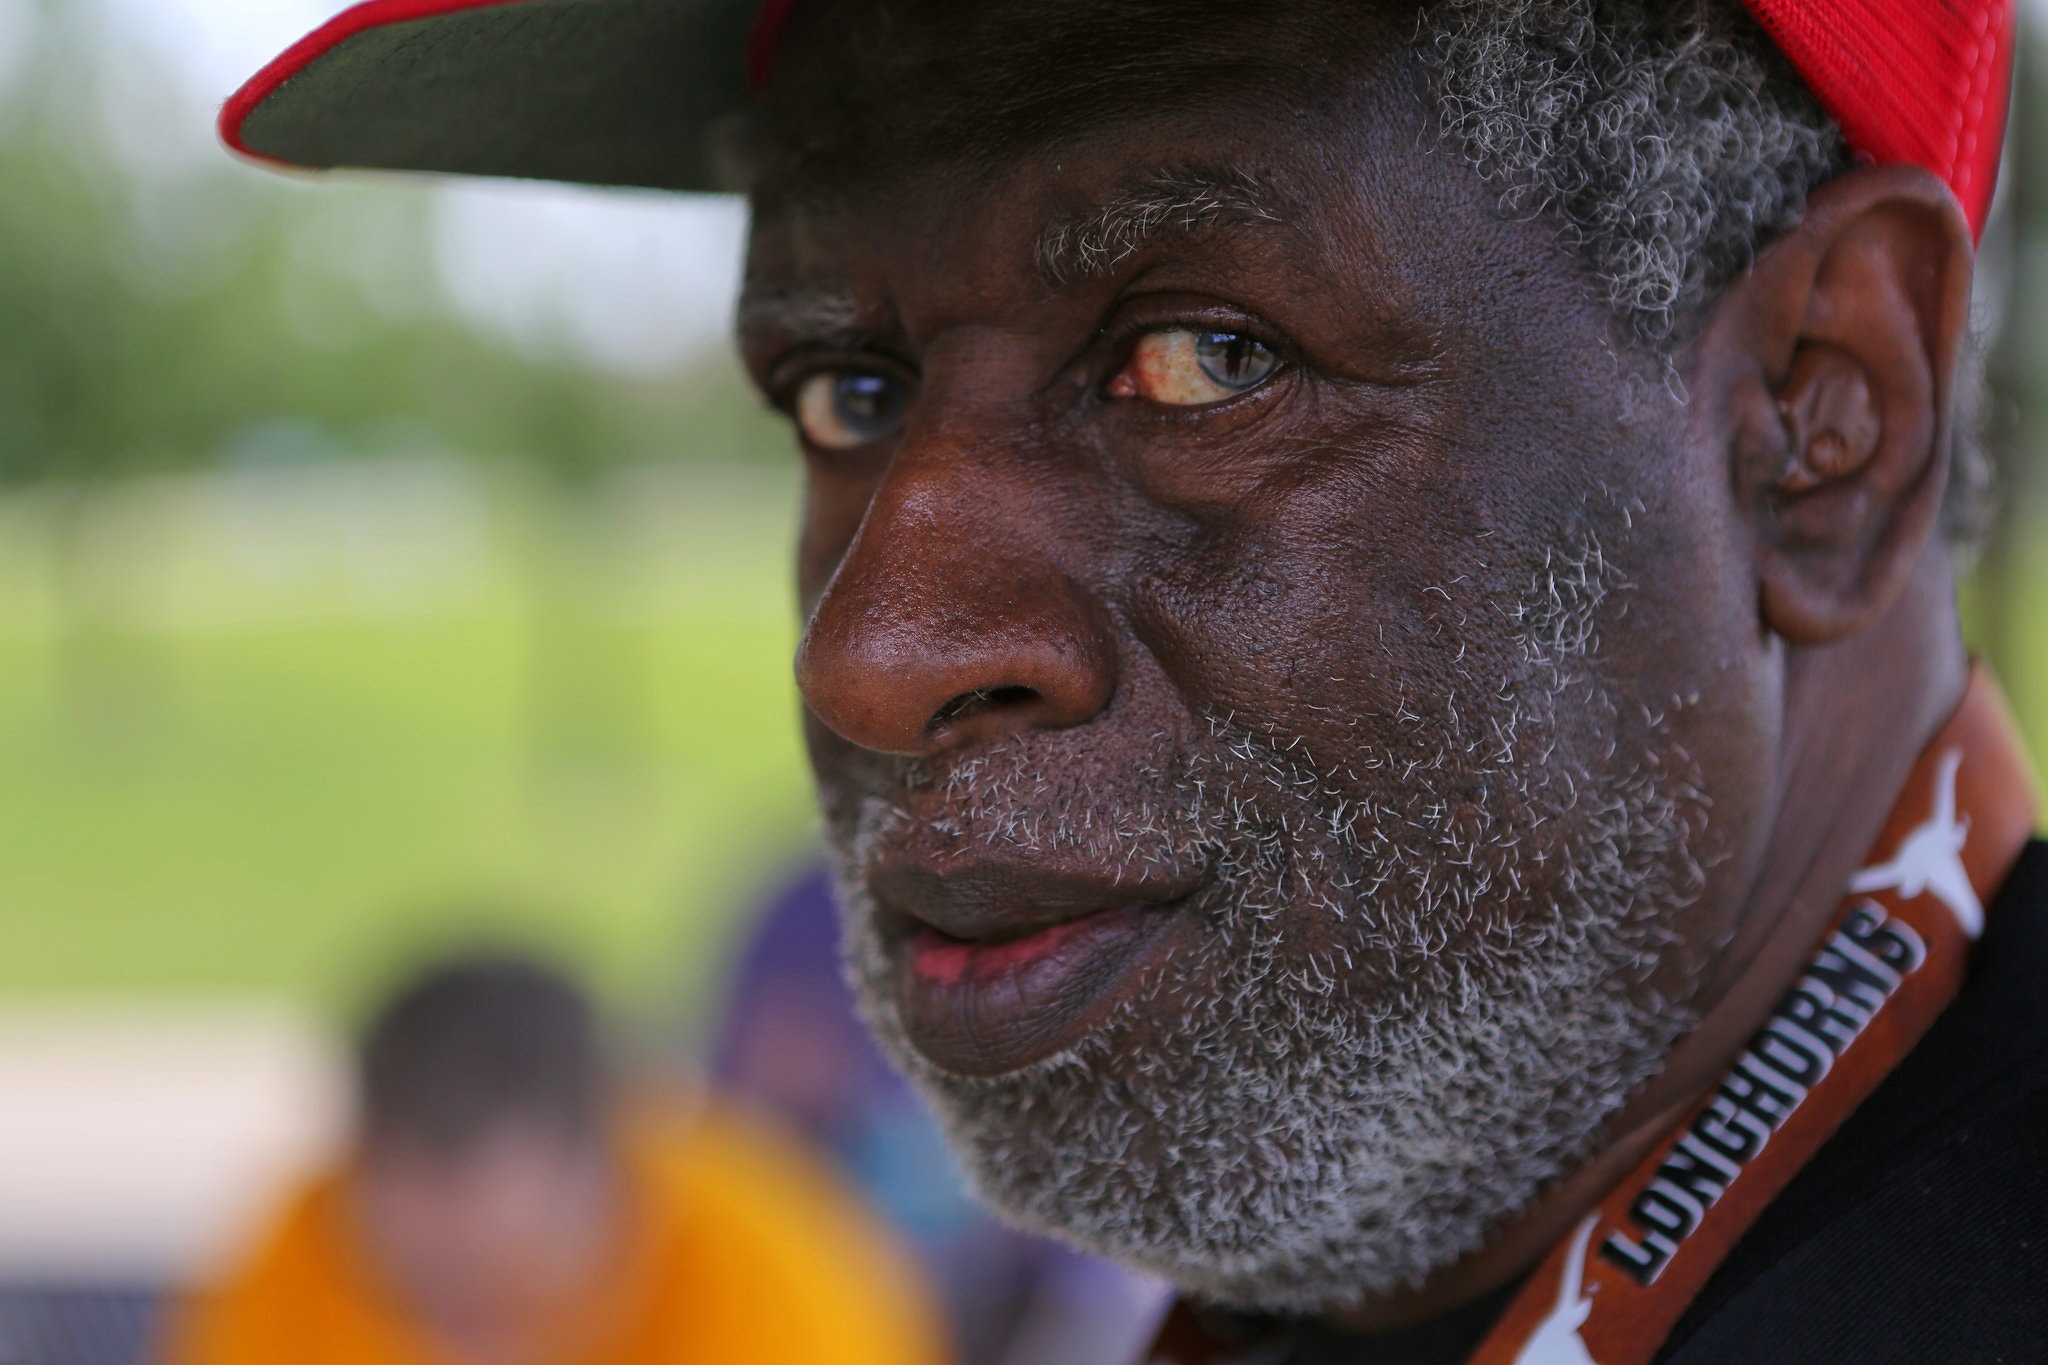 A man wearing a red baseball cap looks into the camera. 